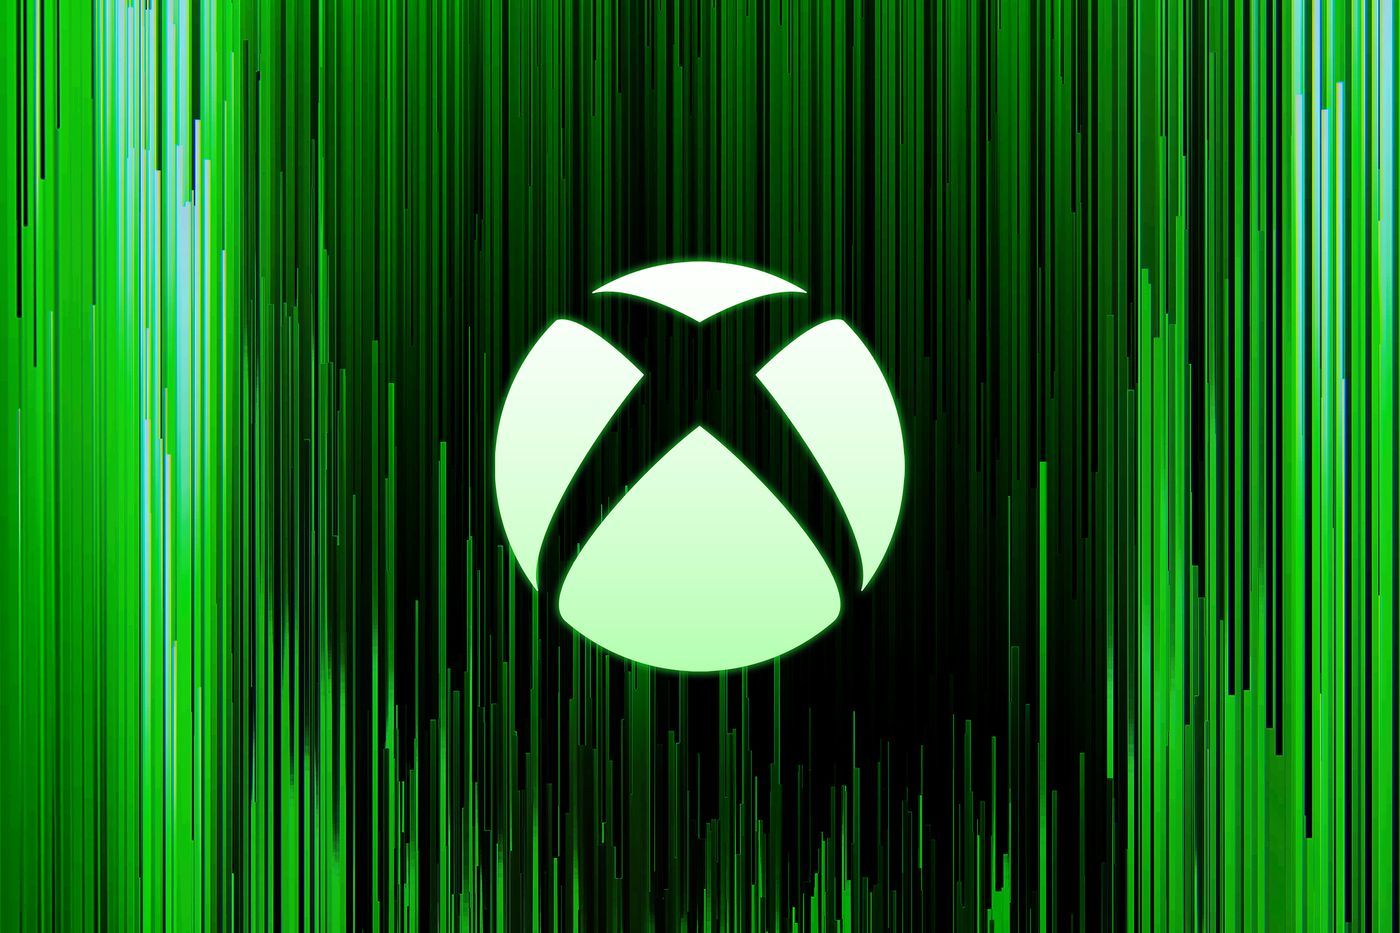 Third Xbox Transparency Report Shows Our Evolving Approach to Creating Safer Gaming Experiences